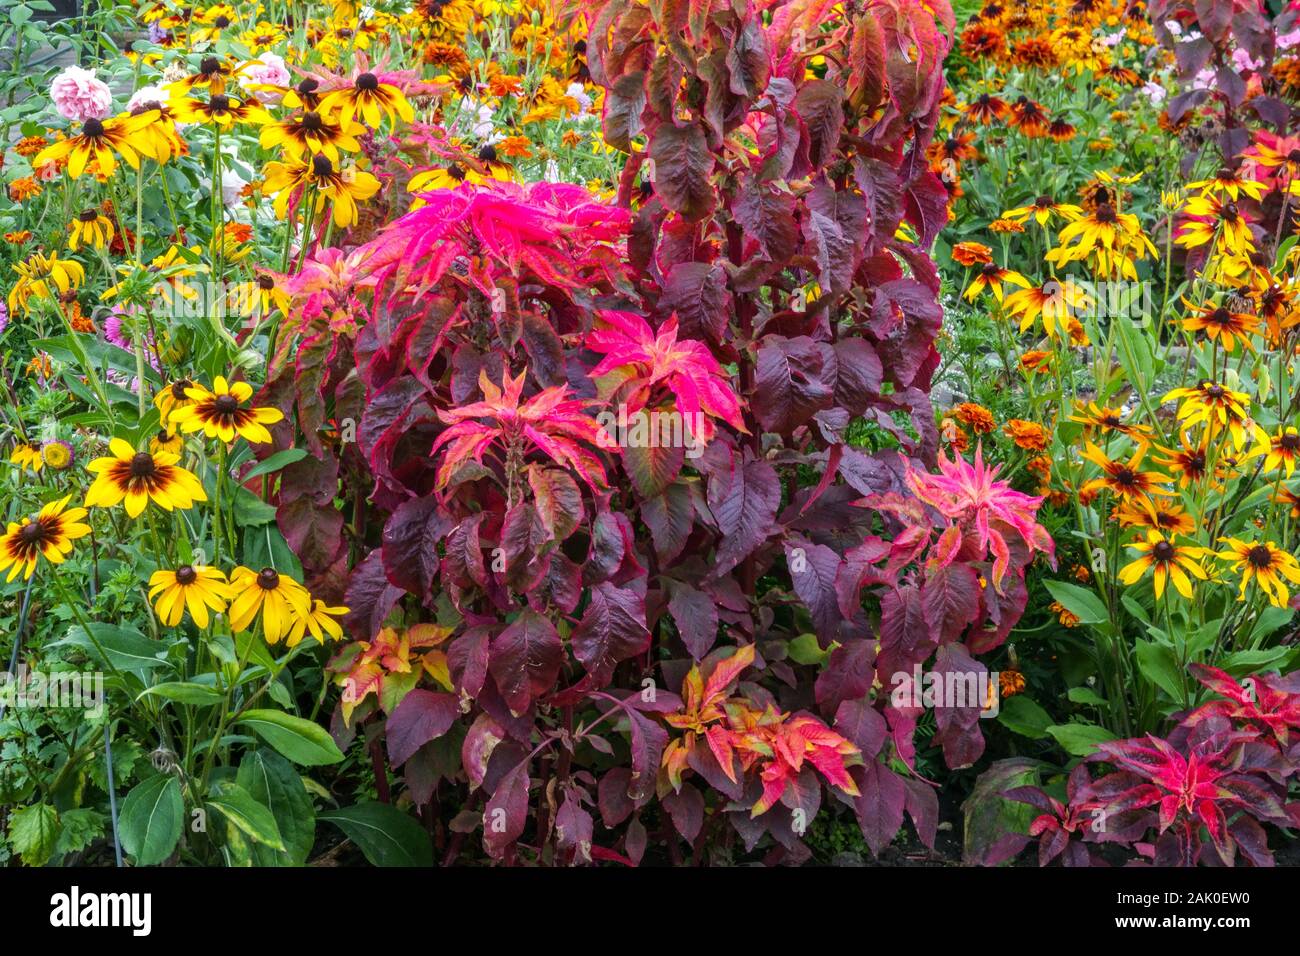 Allotment garden flowers, colorful combination red yellow plants, Black eyed Susan, Amaranthus tricolor Stock Photo